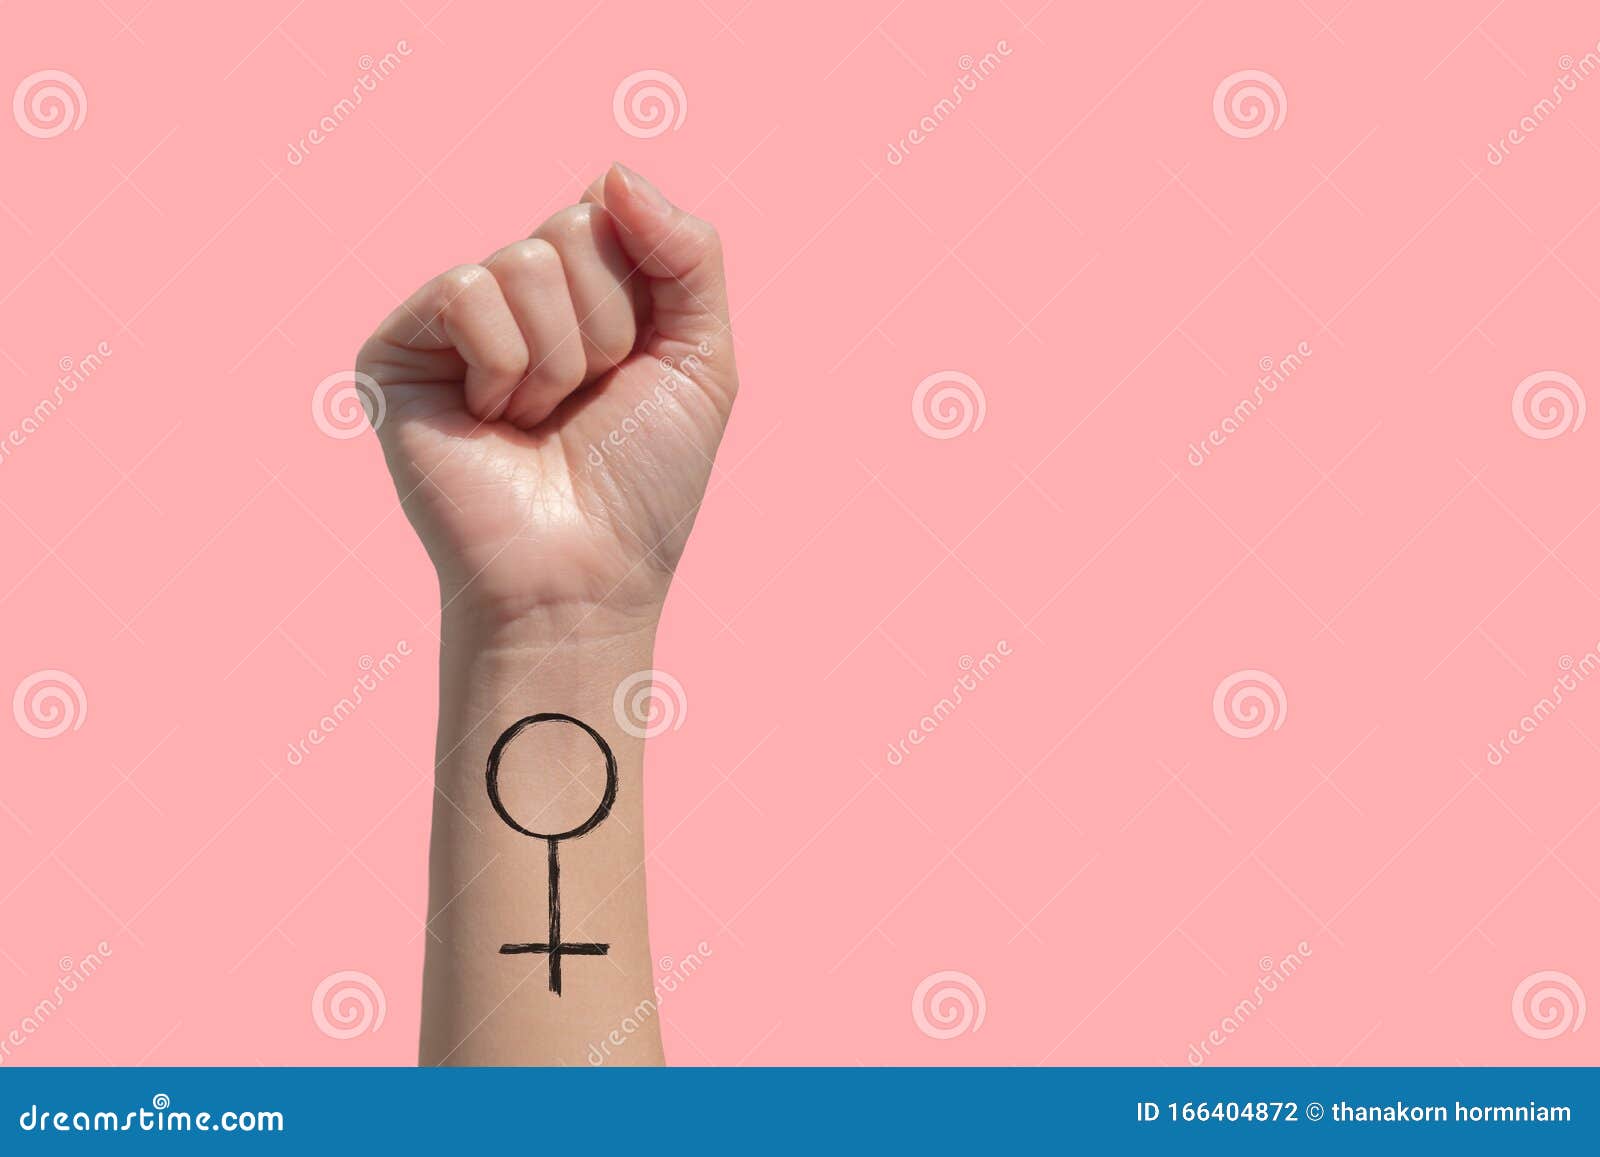 Feminist Icon Tattoos : mother's day gift idea